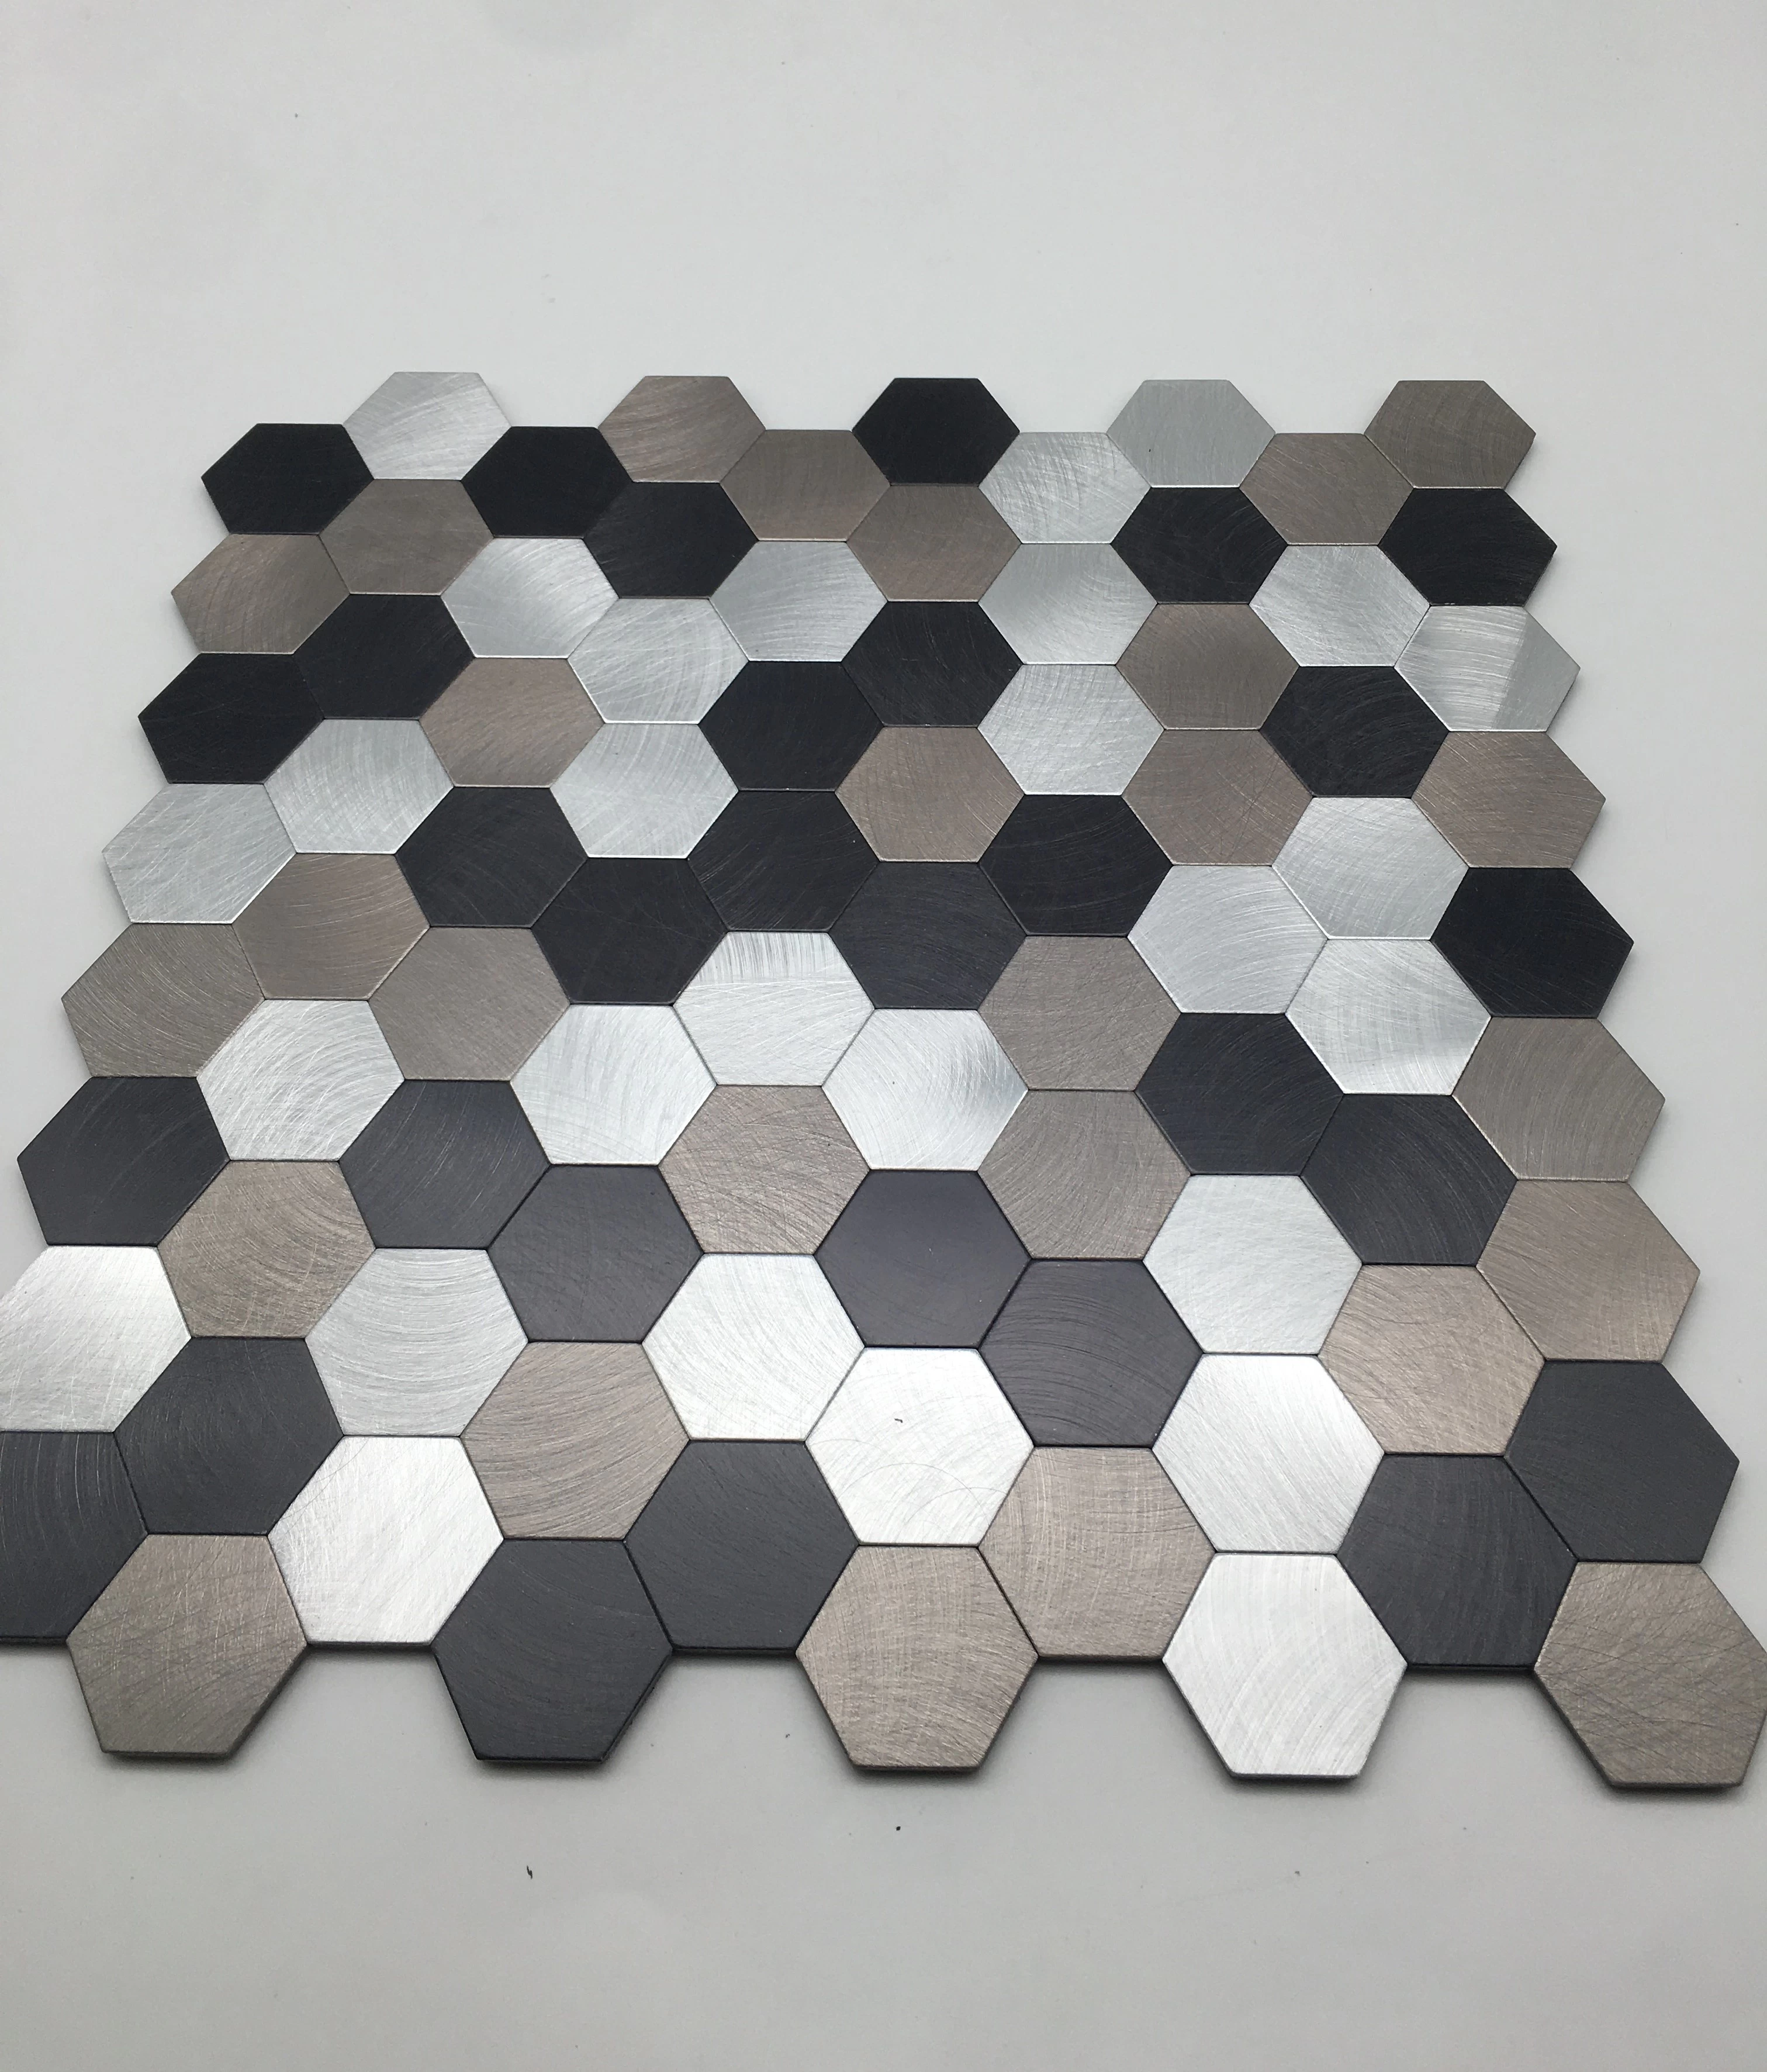 Mosaic Decorative Self adhesive Wall Tile Peel And Stick In mosaic hexagon Tile Stickers